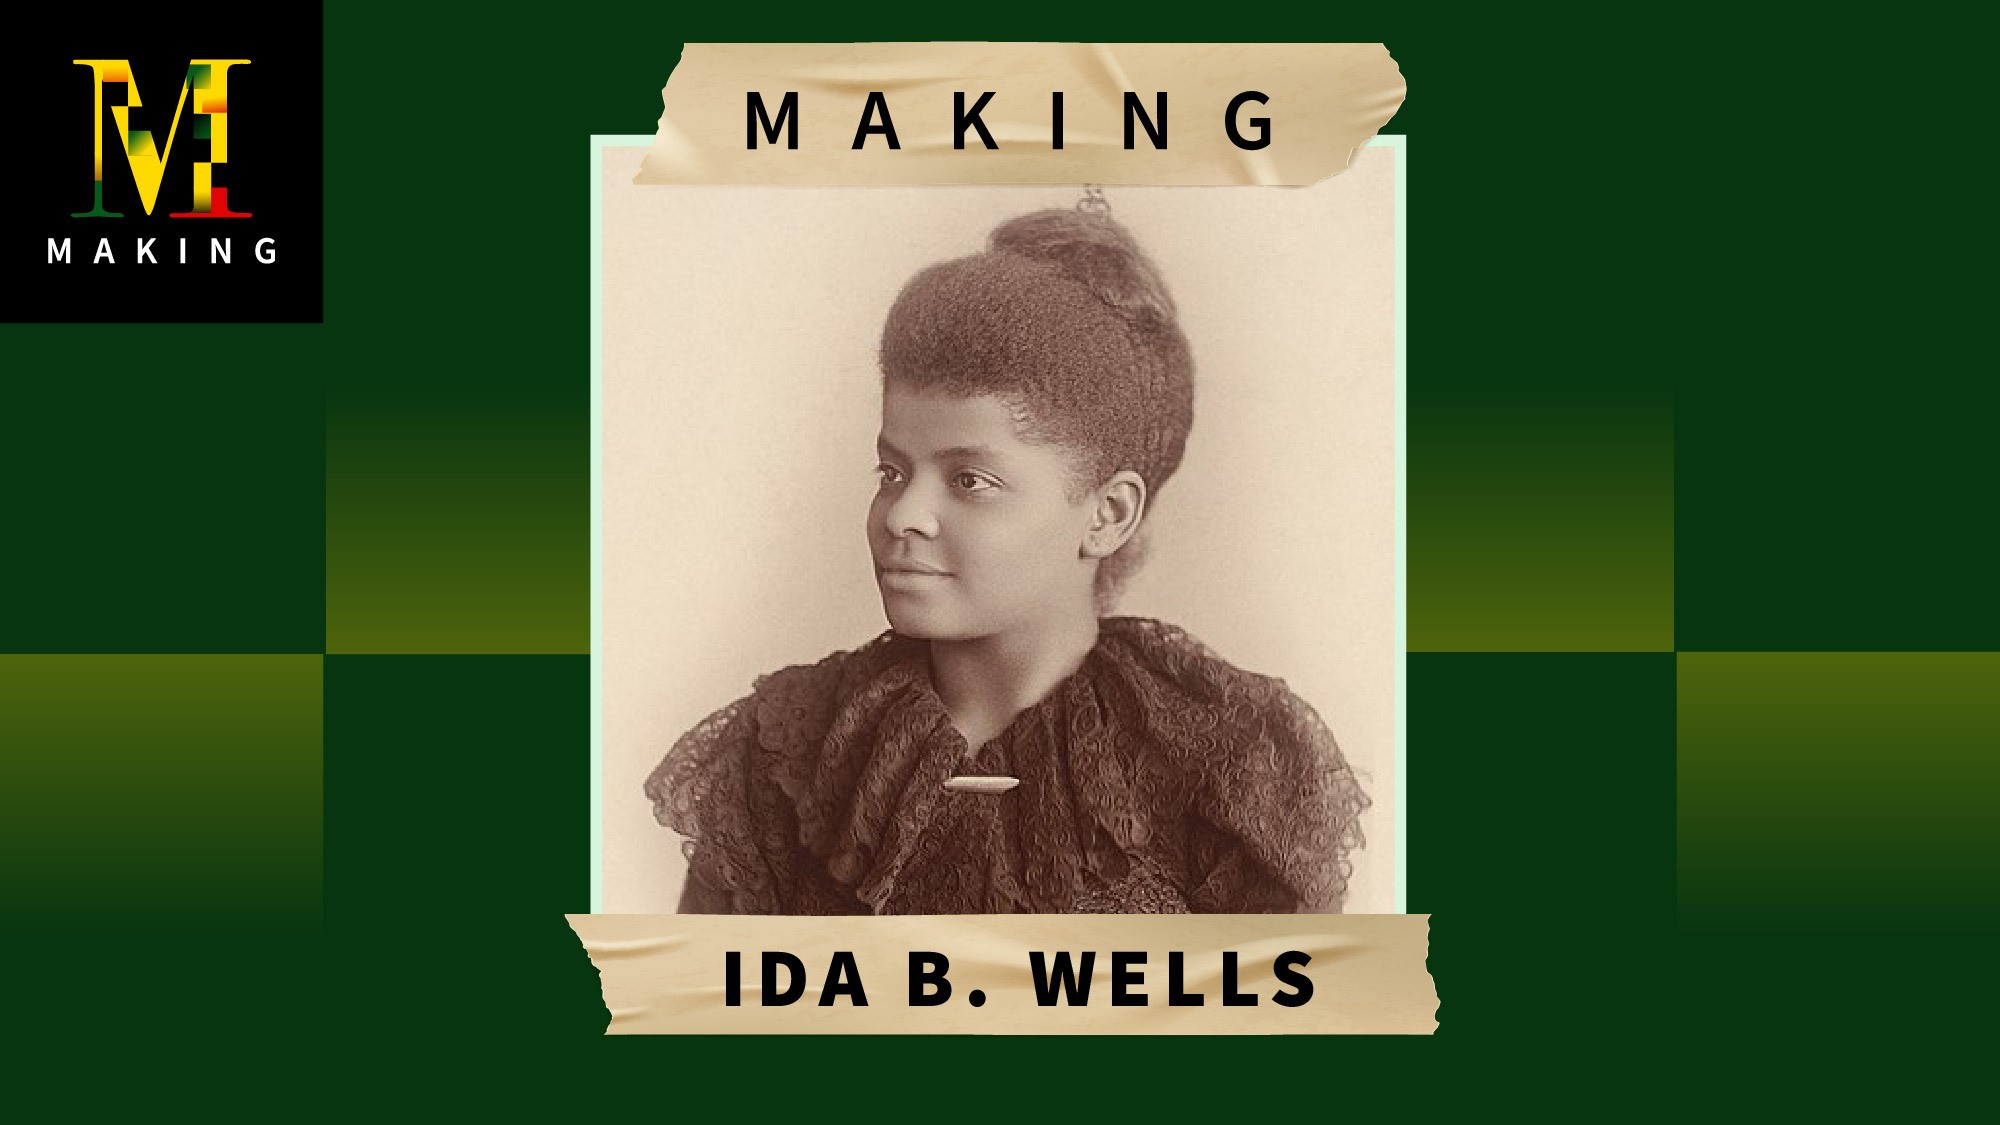 Ida B. Wells used truth as a weapon | WBEZ Chicago